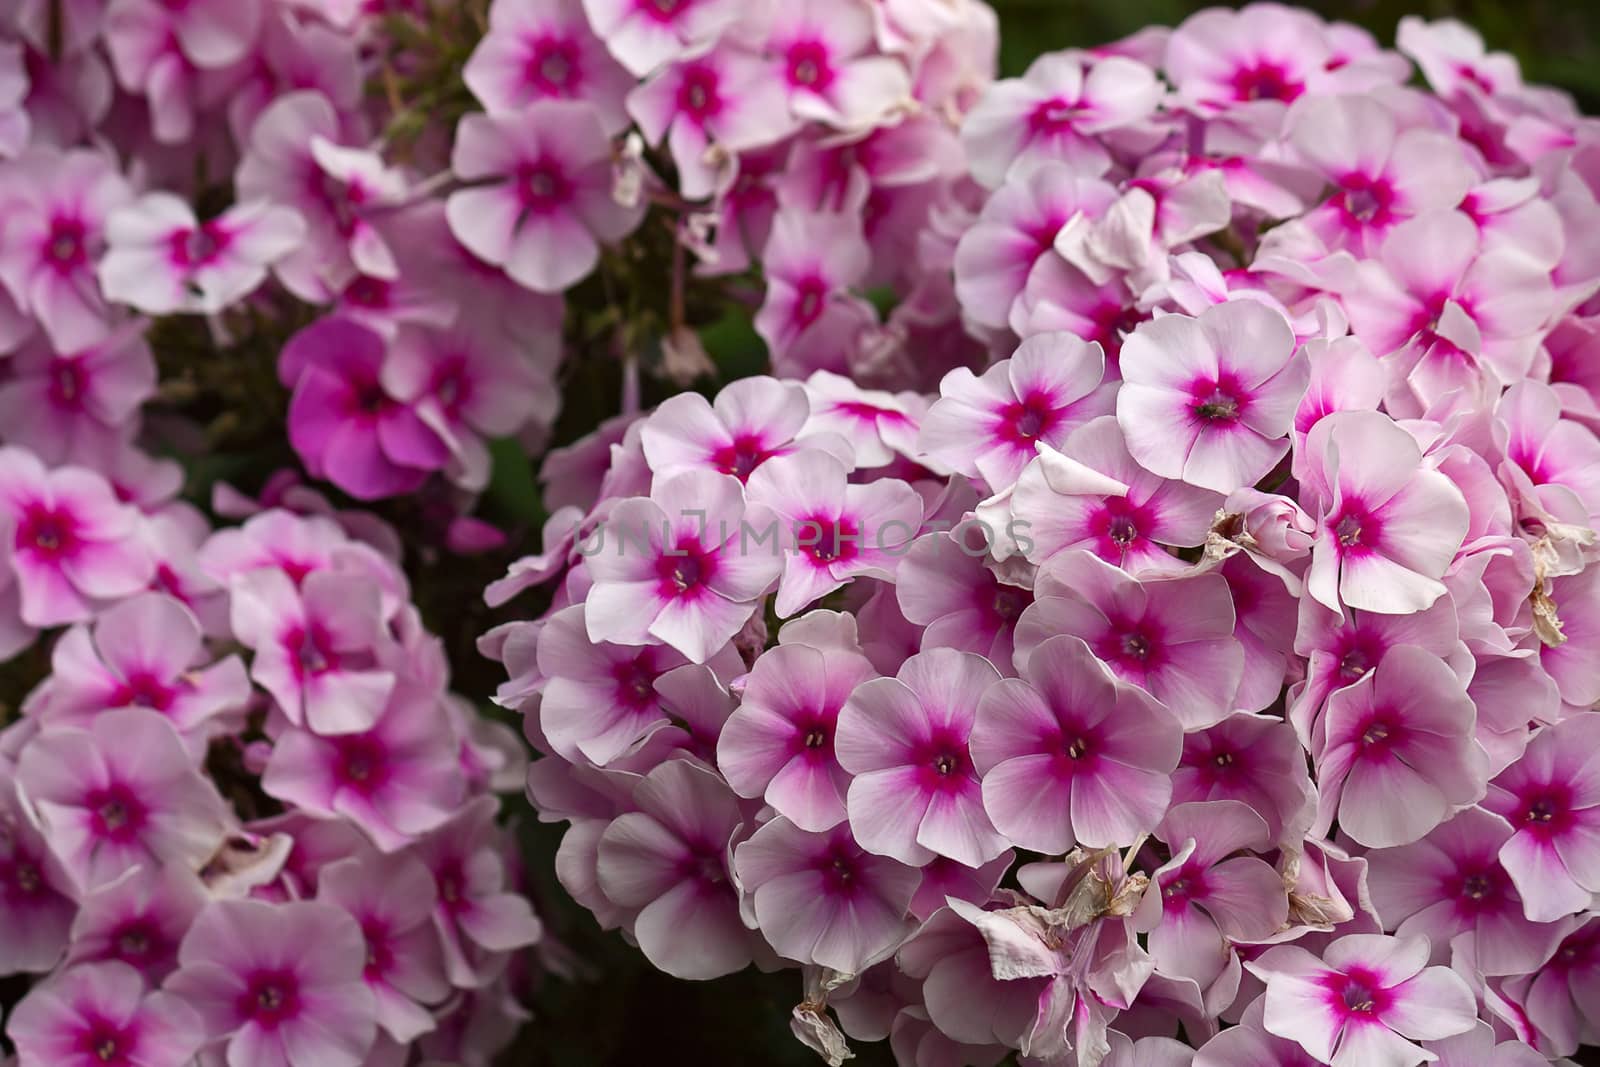 Background of pink phlox close-up. Image with shallow depth of field.